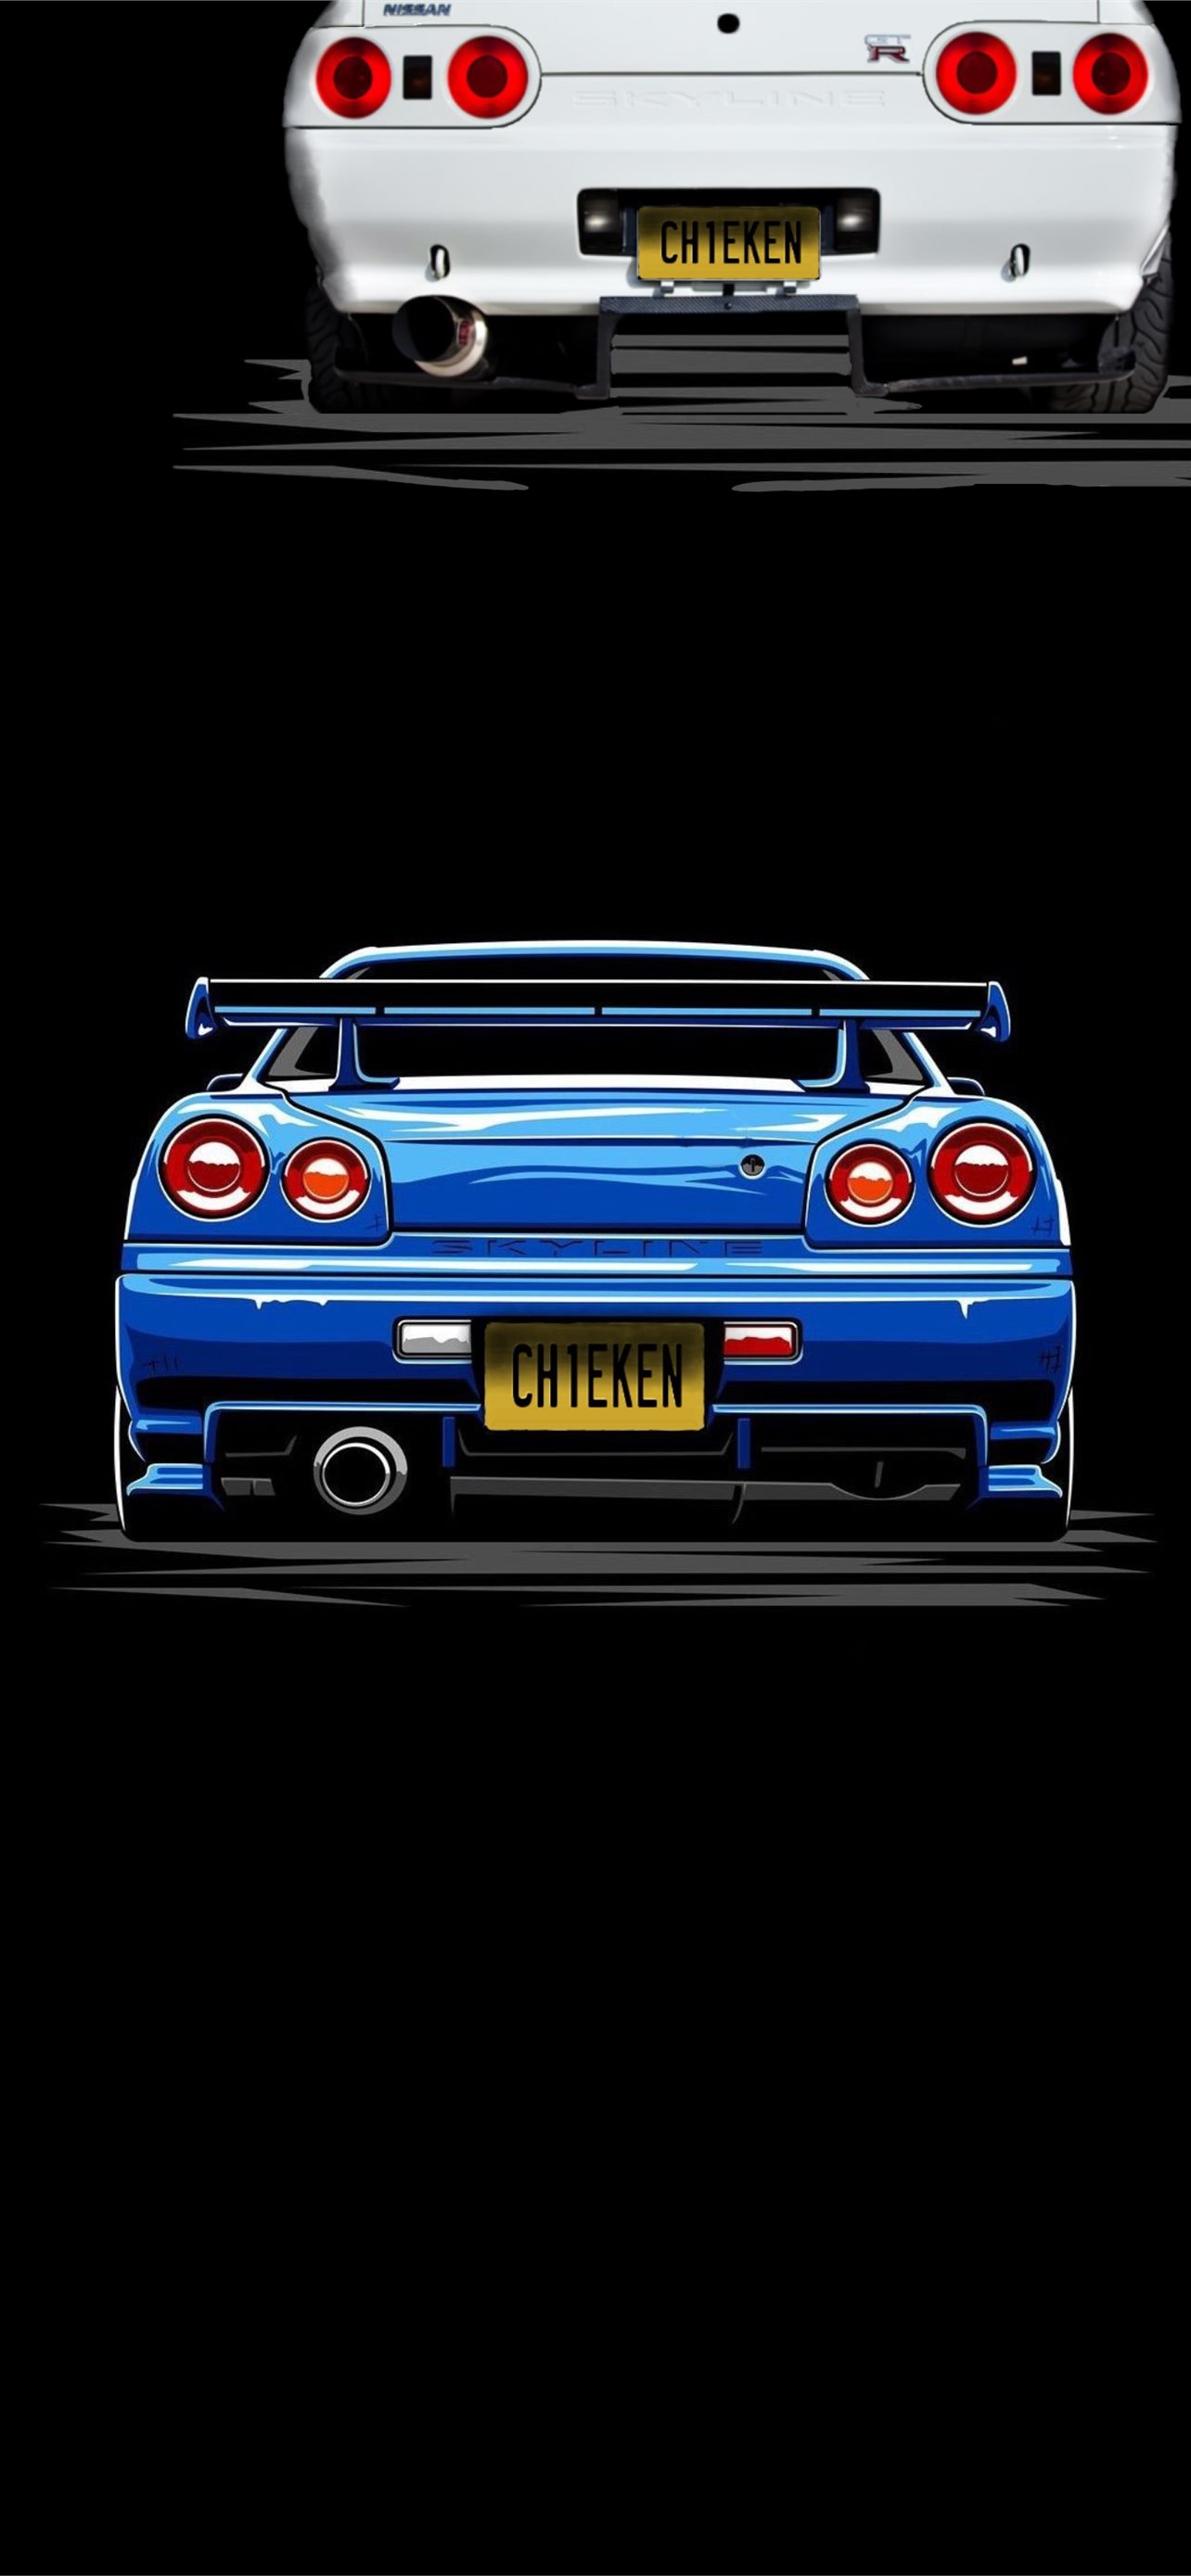 Nissan R32 Wallpapers